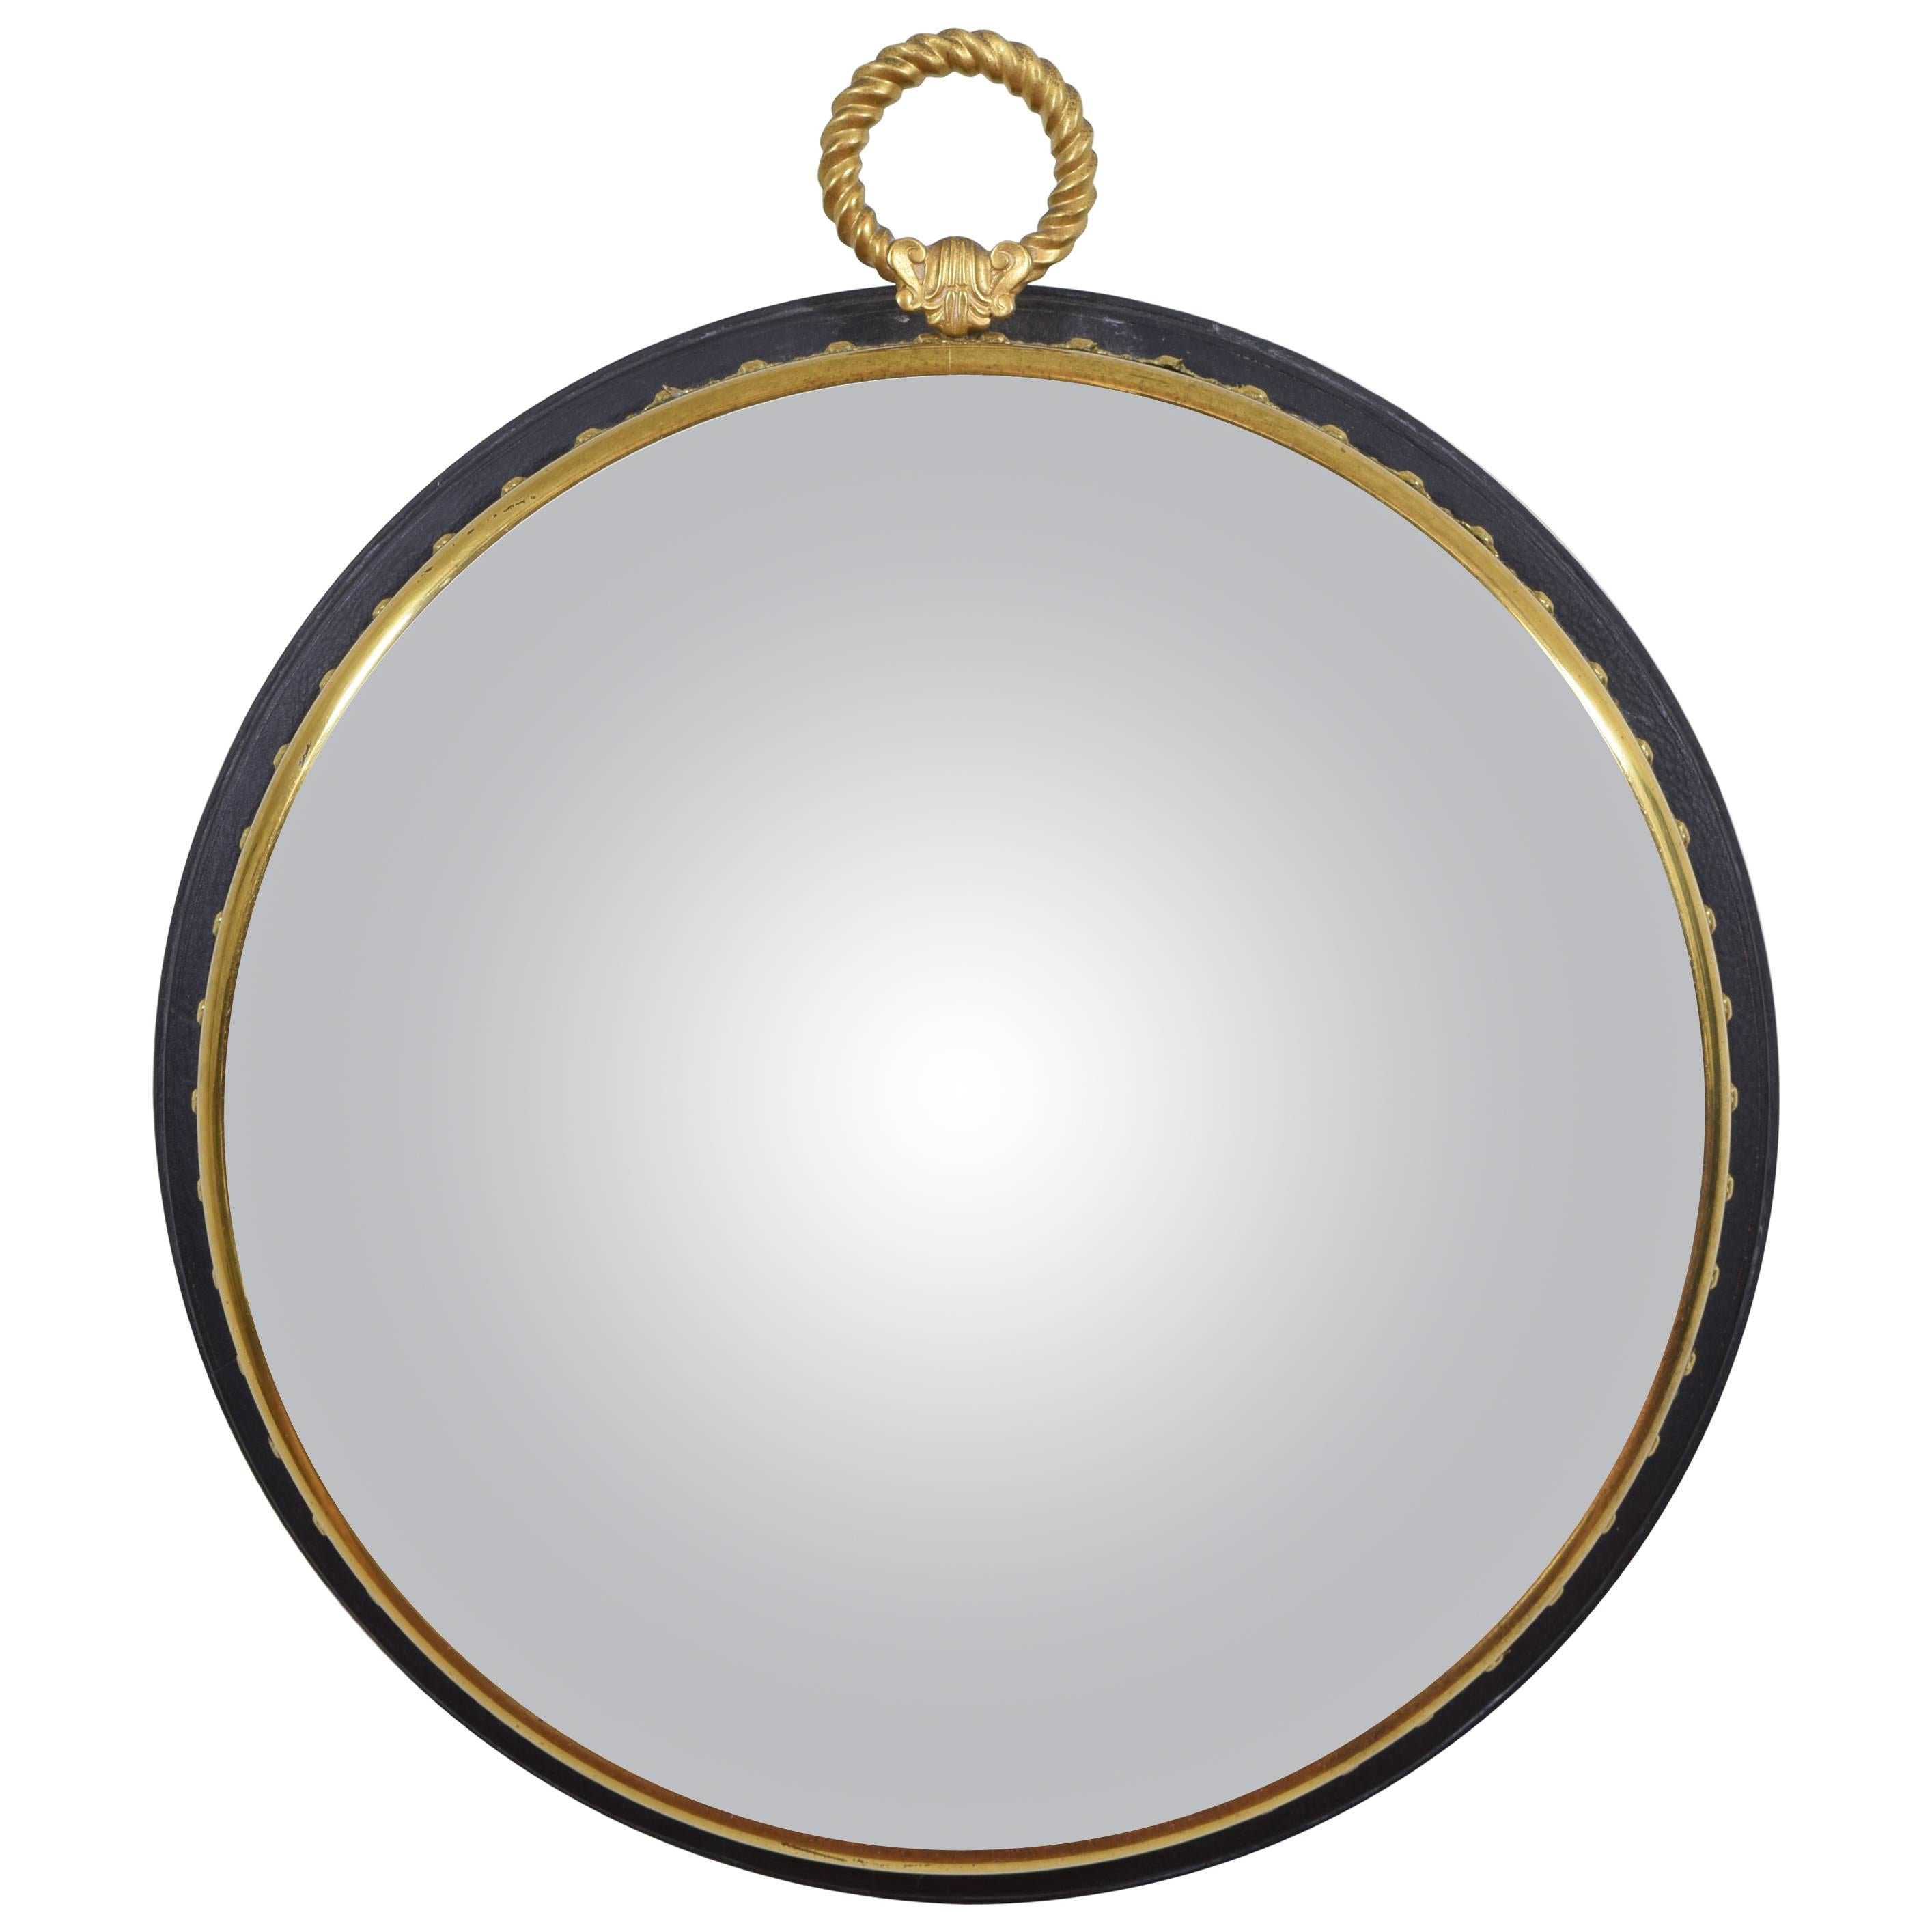 French Neoclassical Style Ebonized Wood and Brass Decorative Convex Mirror